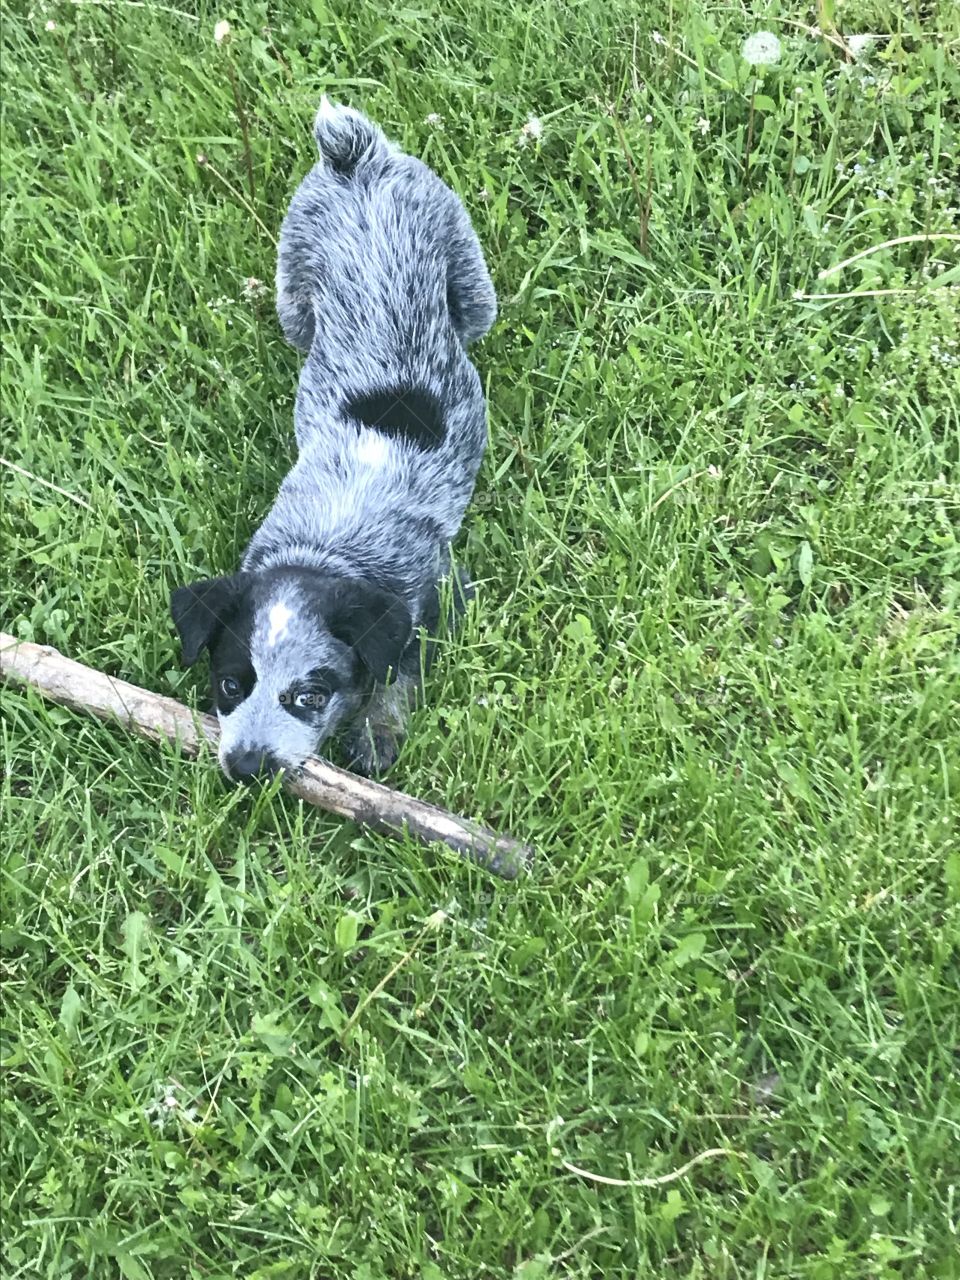 Blue Heeler Puppy playing with large stick outside in the grass.